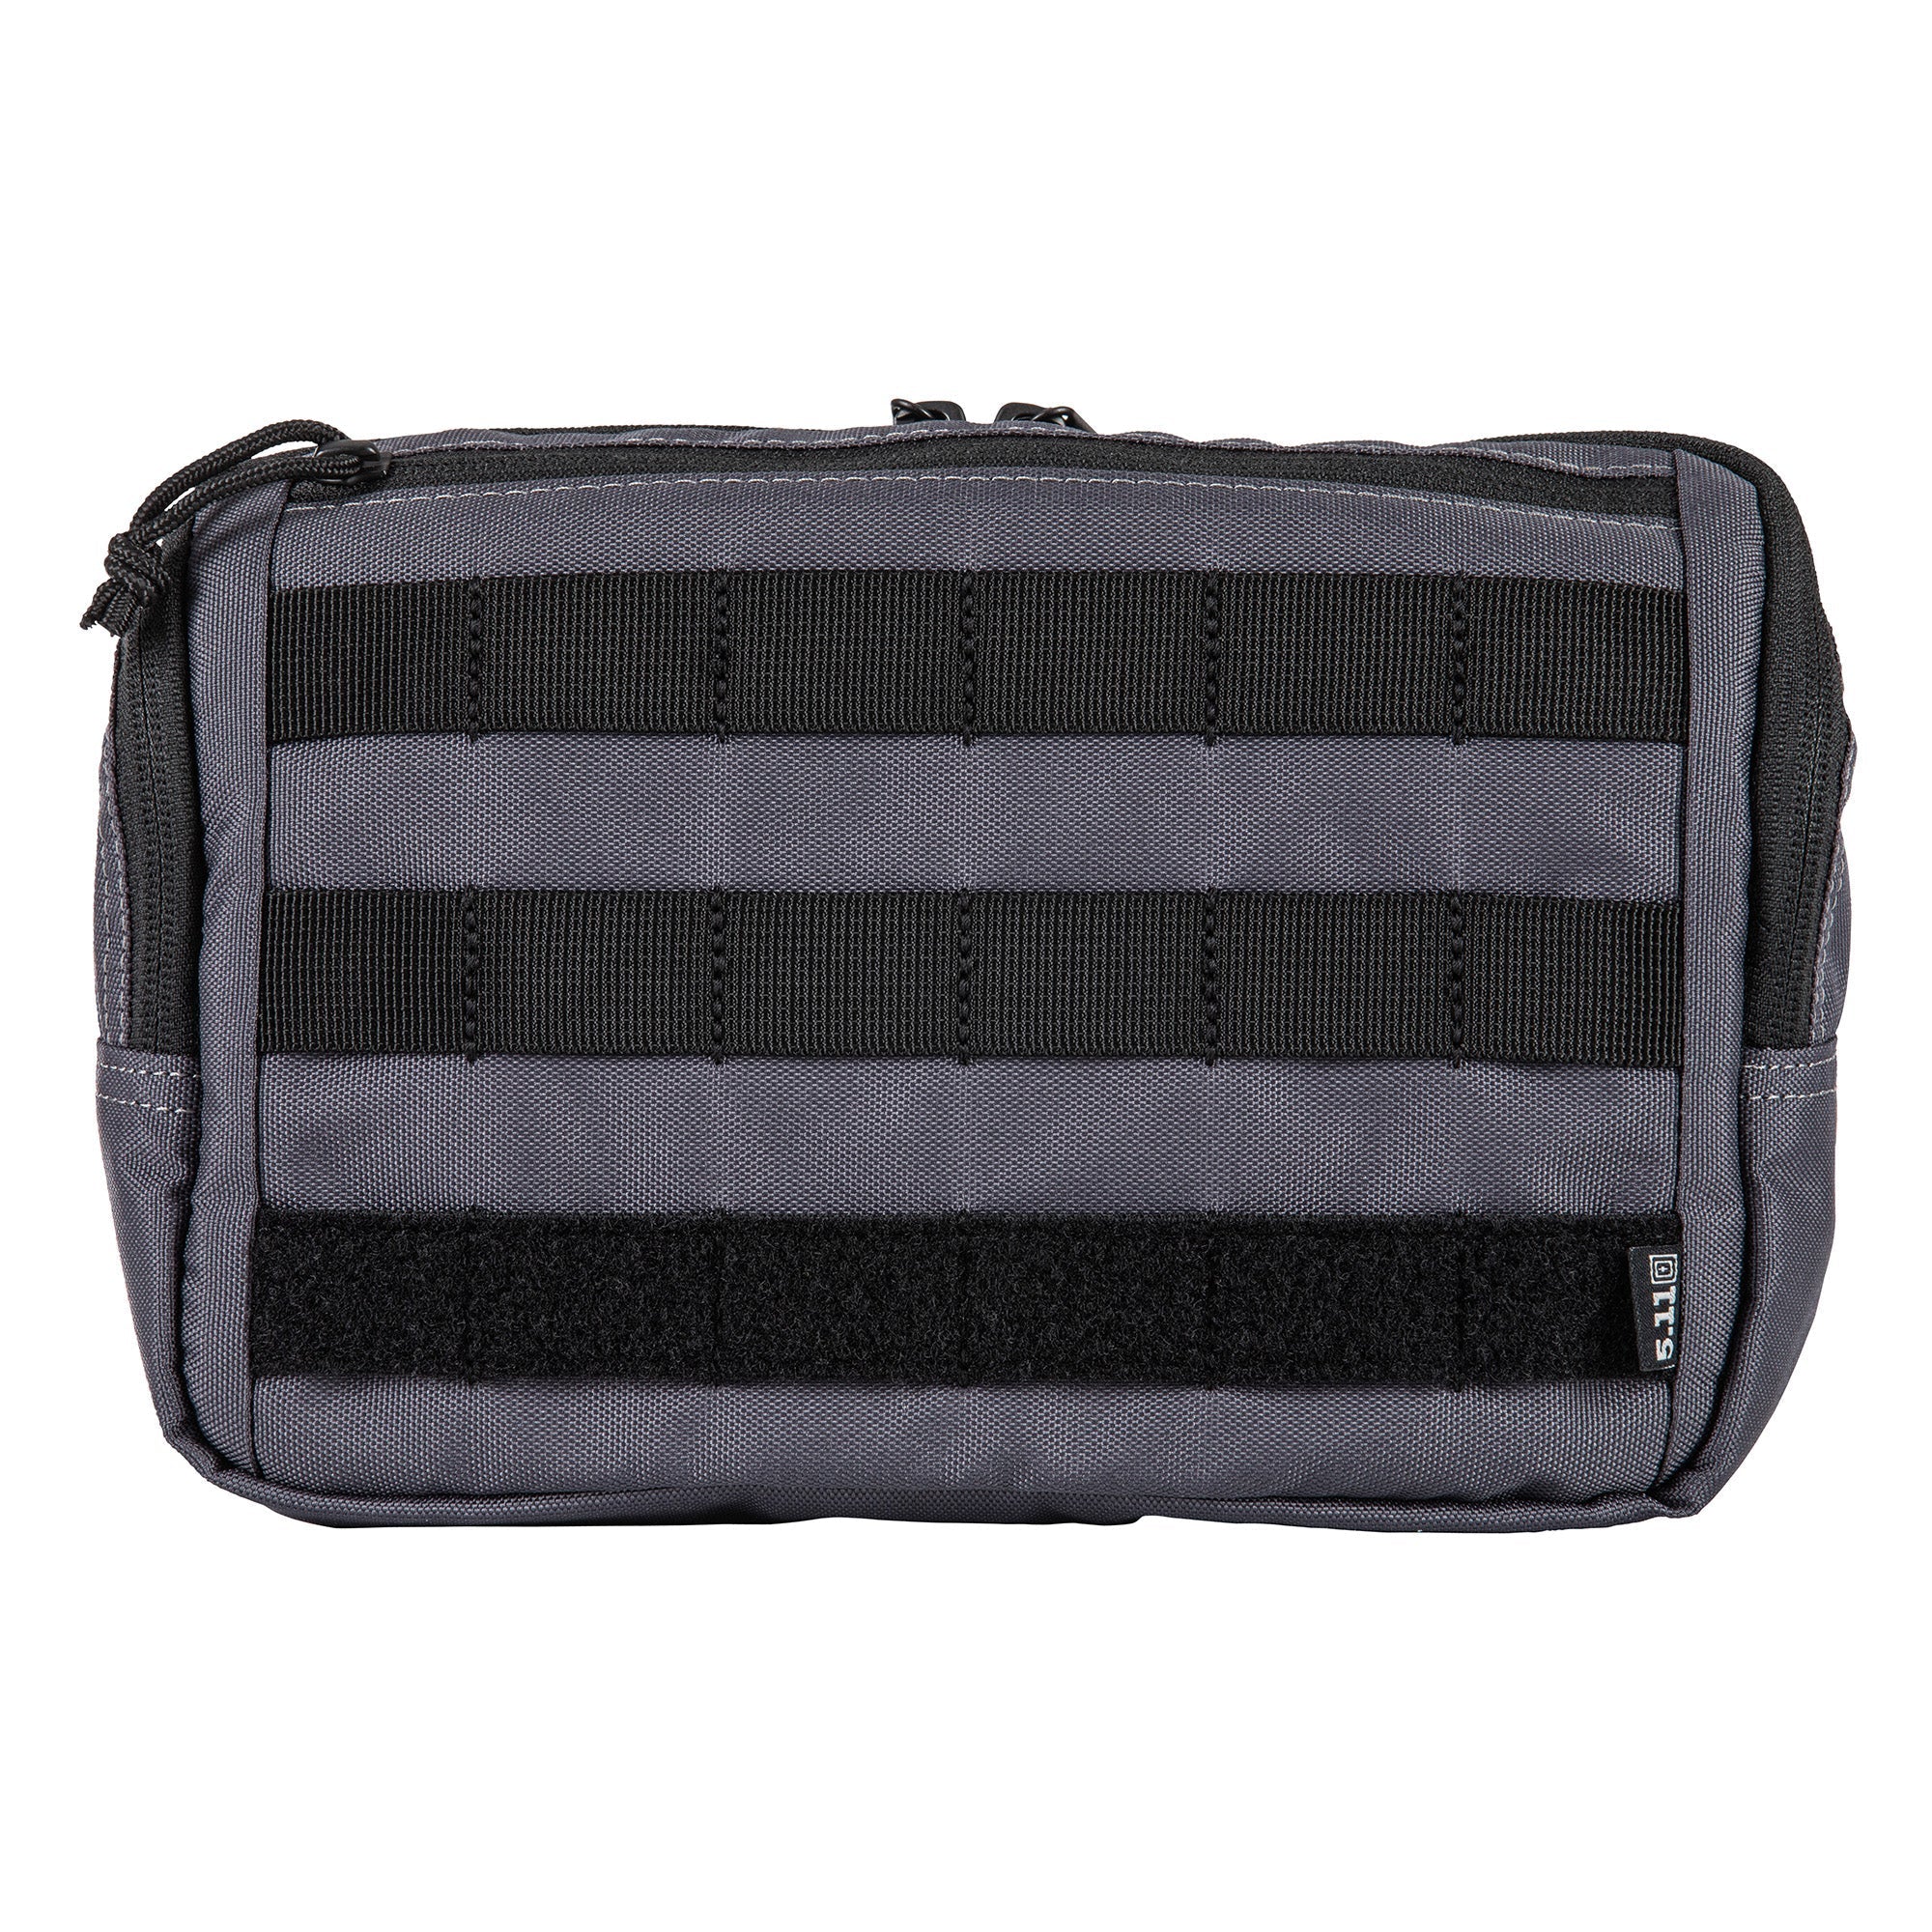 5.11 Tactical Rapid Waist Pack Bags, Packs and Cases 5.11 Tactical Coal Tactical Gear Supplier Tactical Distributors Australia